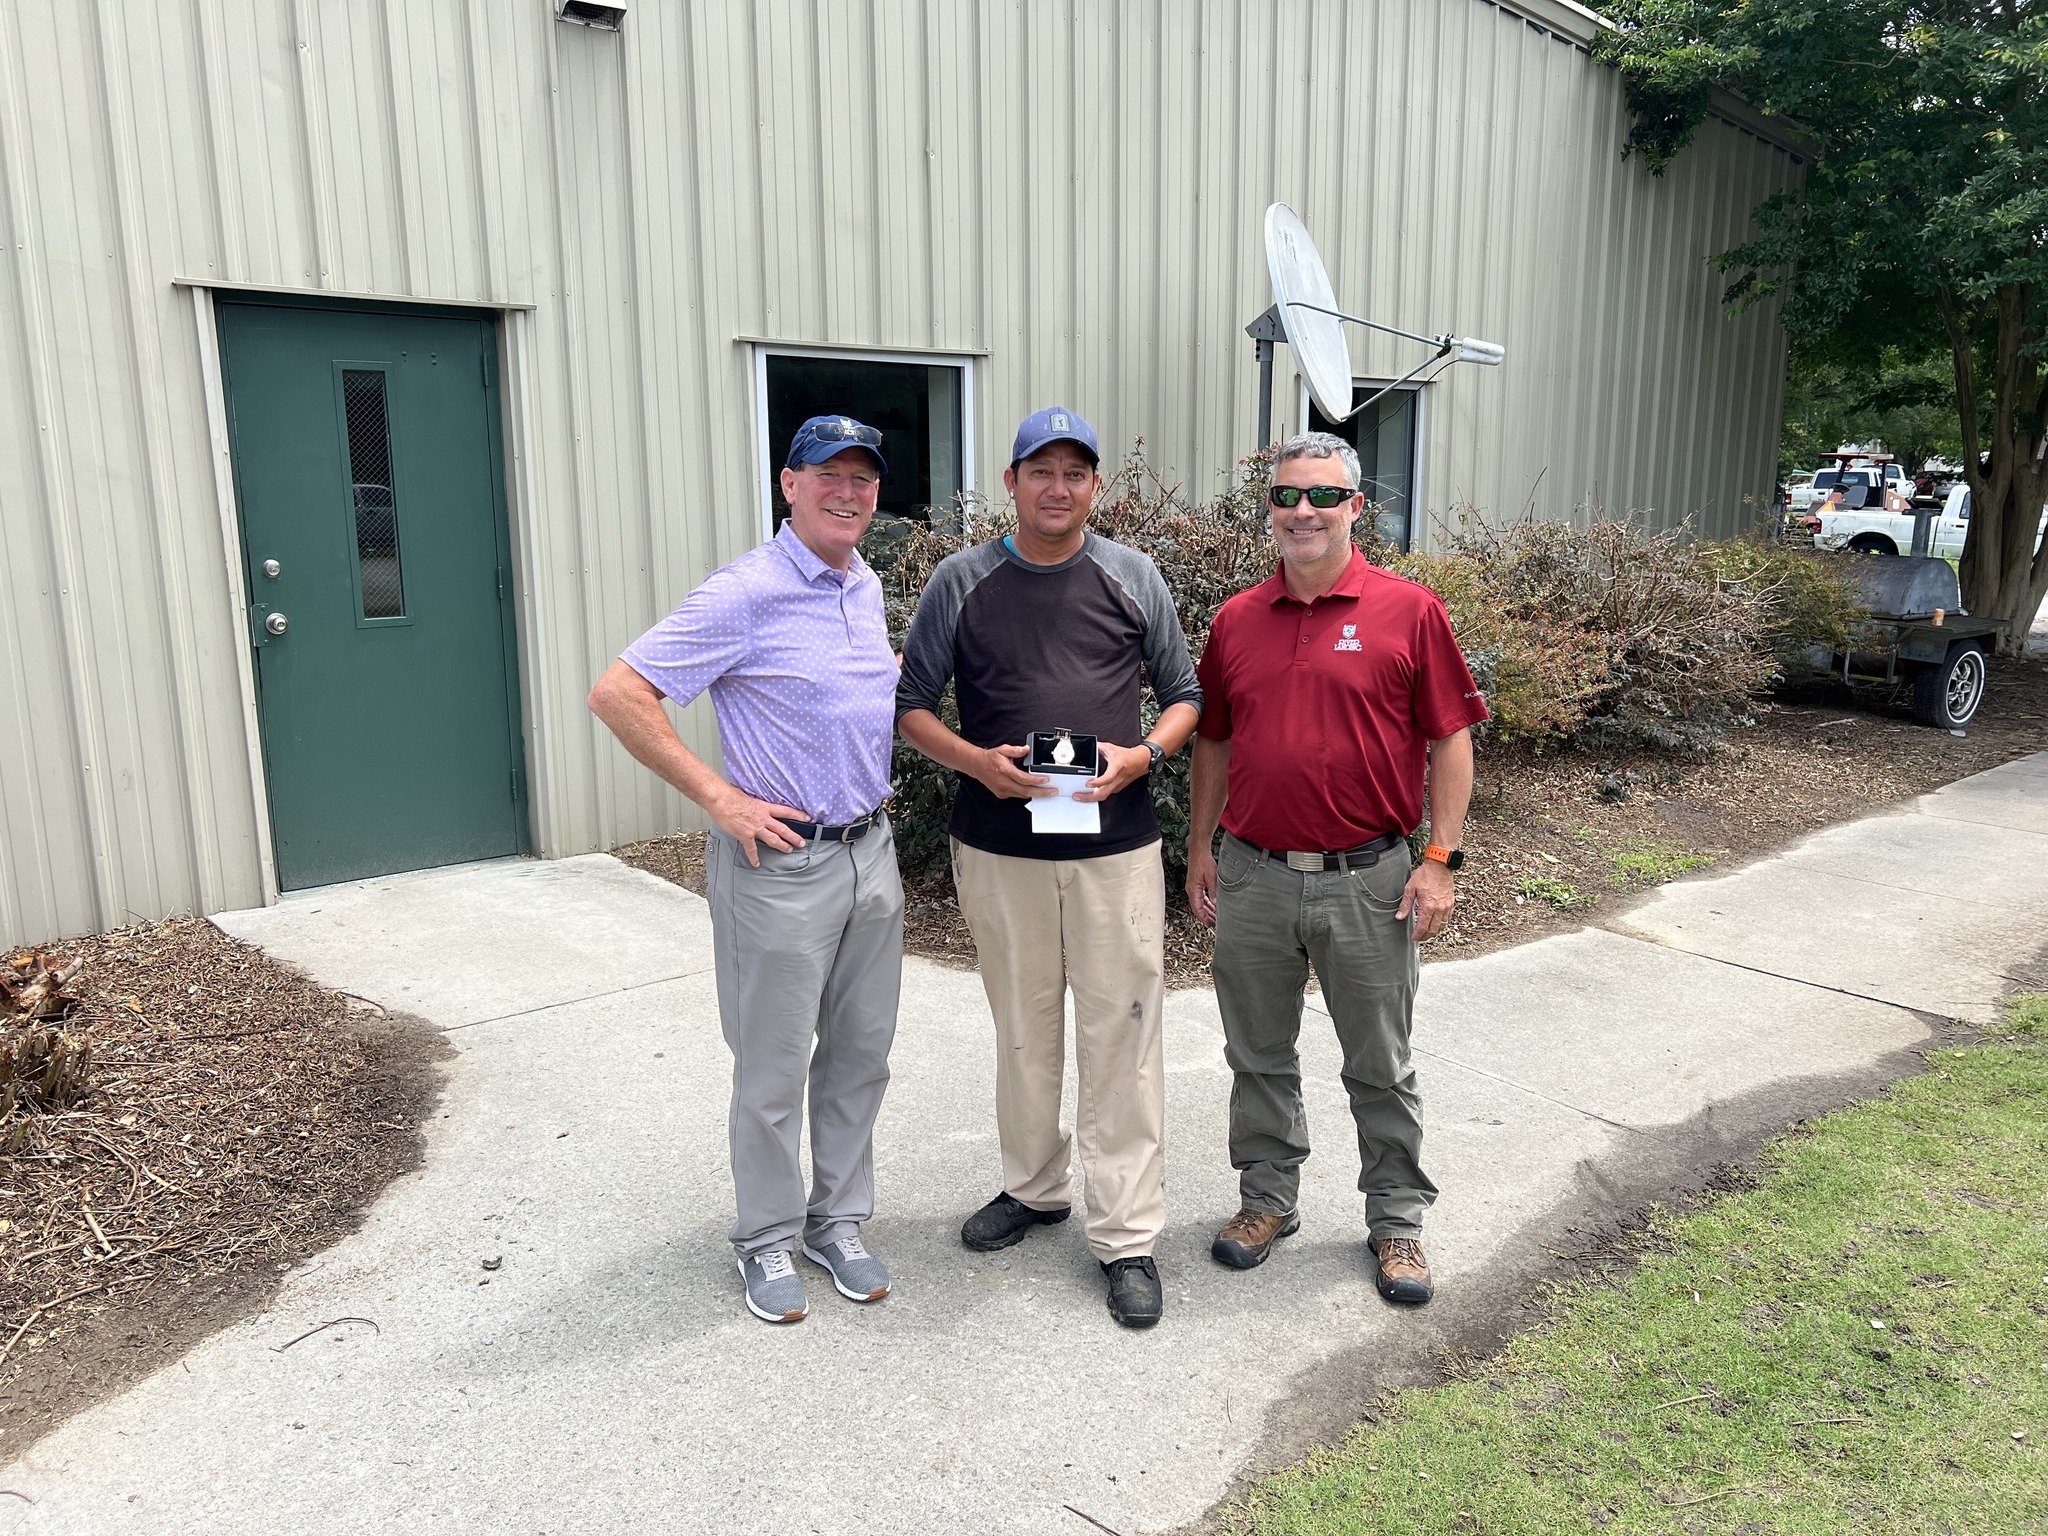 Congratulations to Olvin Murillo Rodriguez from@riverlandingnc  Golf Course Maintenance on being with MFV for 15 years! Pictured with Olvin are Director of Hospitality and Club Operations Larry George and Director of Golf Maintenance Chris Humphrey.